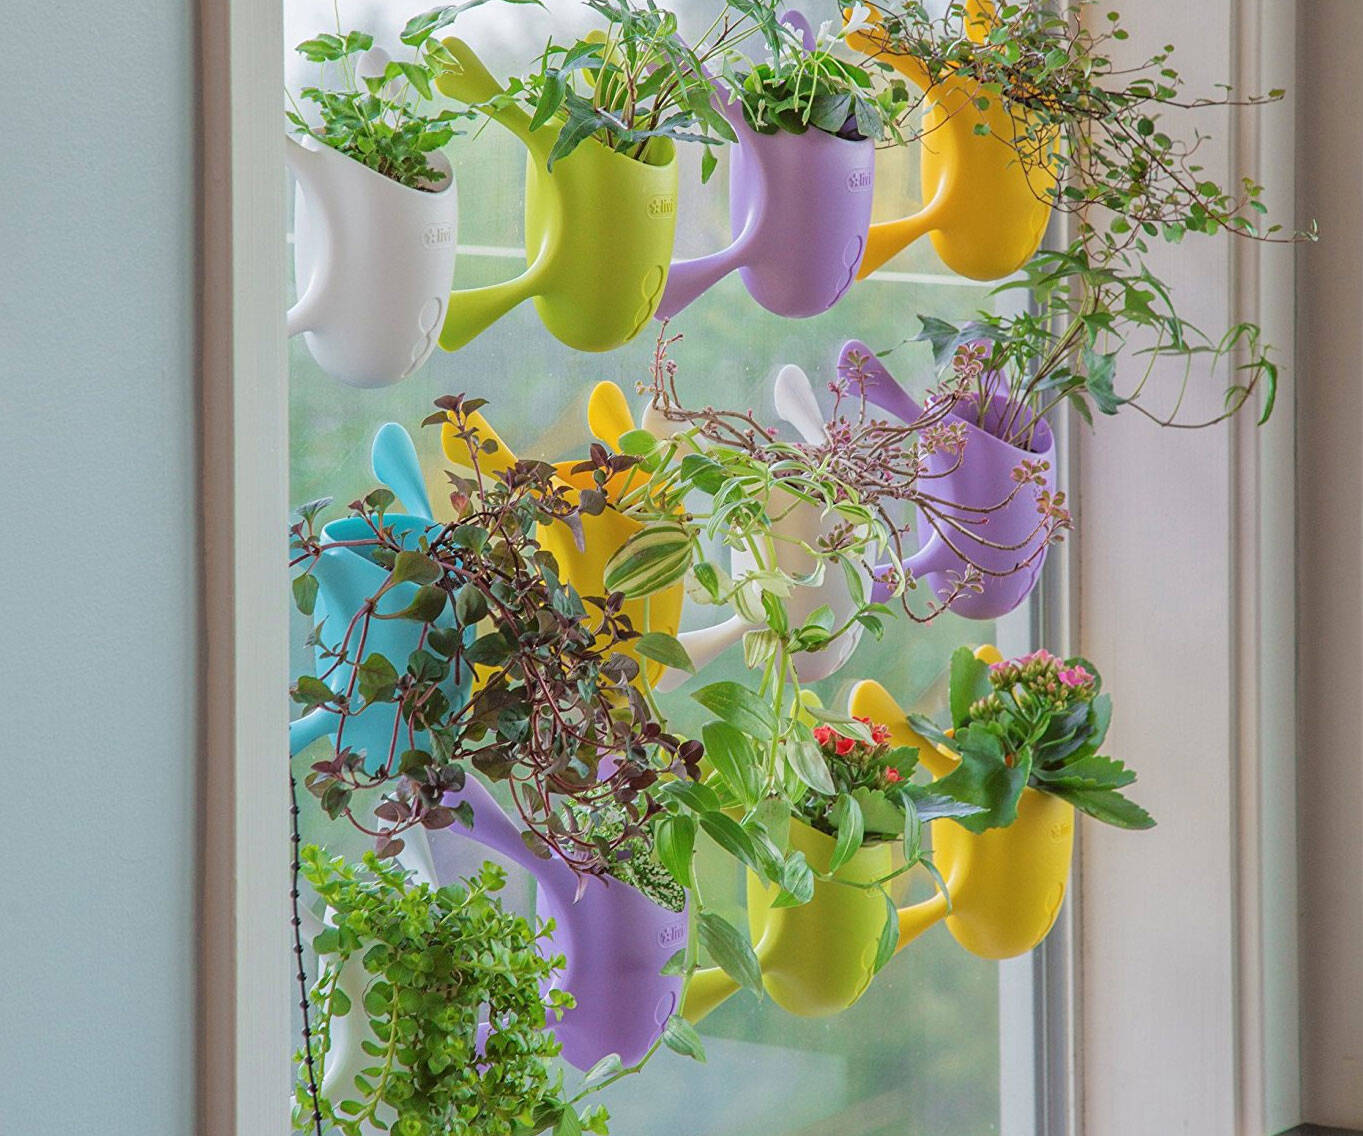 Indoor Suctioned Window/Wall Planter - //coolthings.us